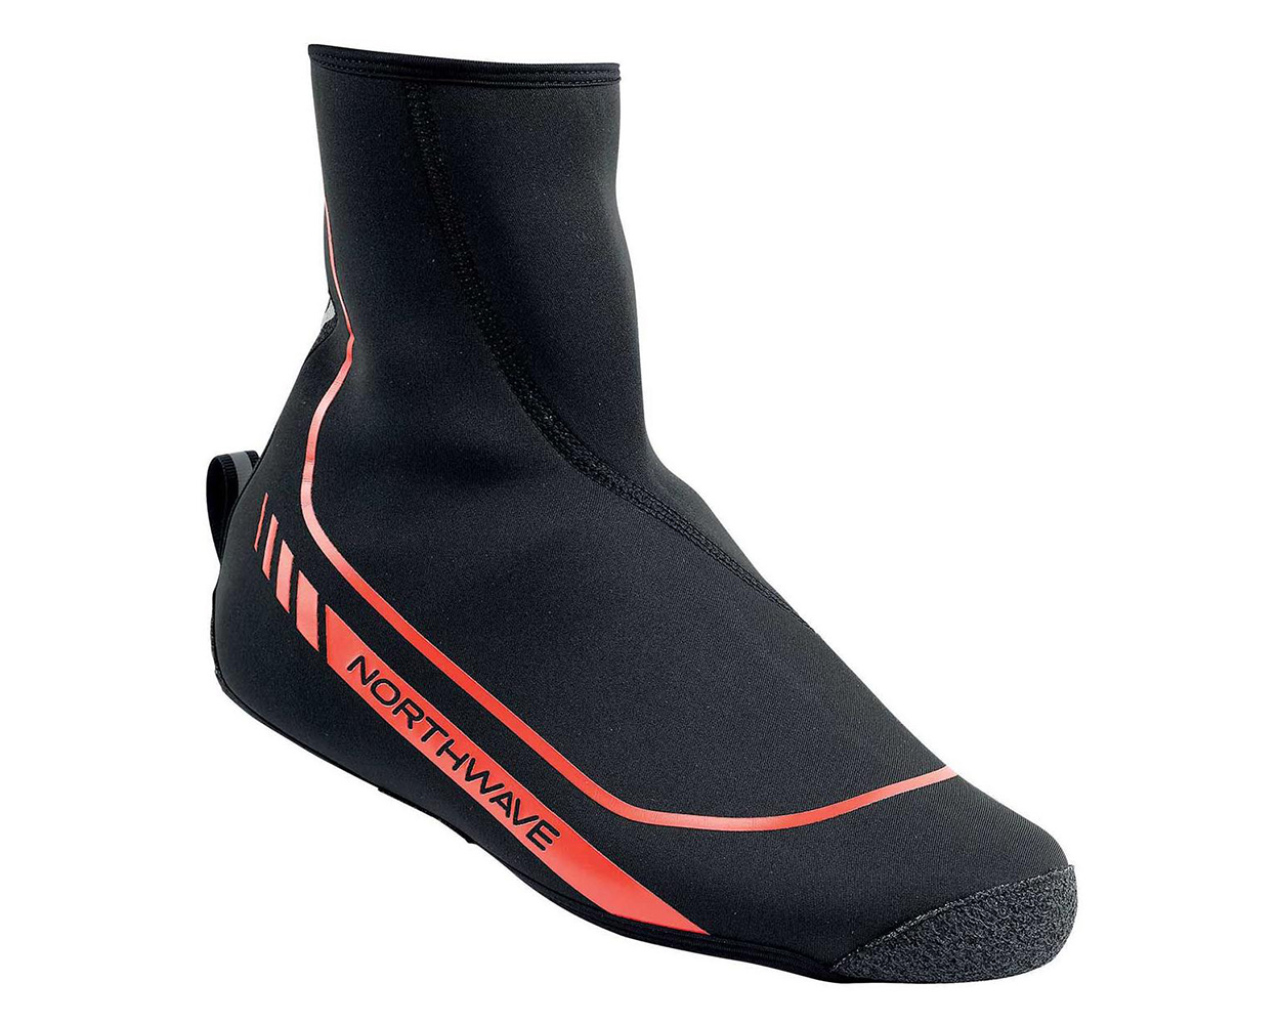 Northwave Sonic 2 Cycling Shoecovers | Merlin Cycles